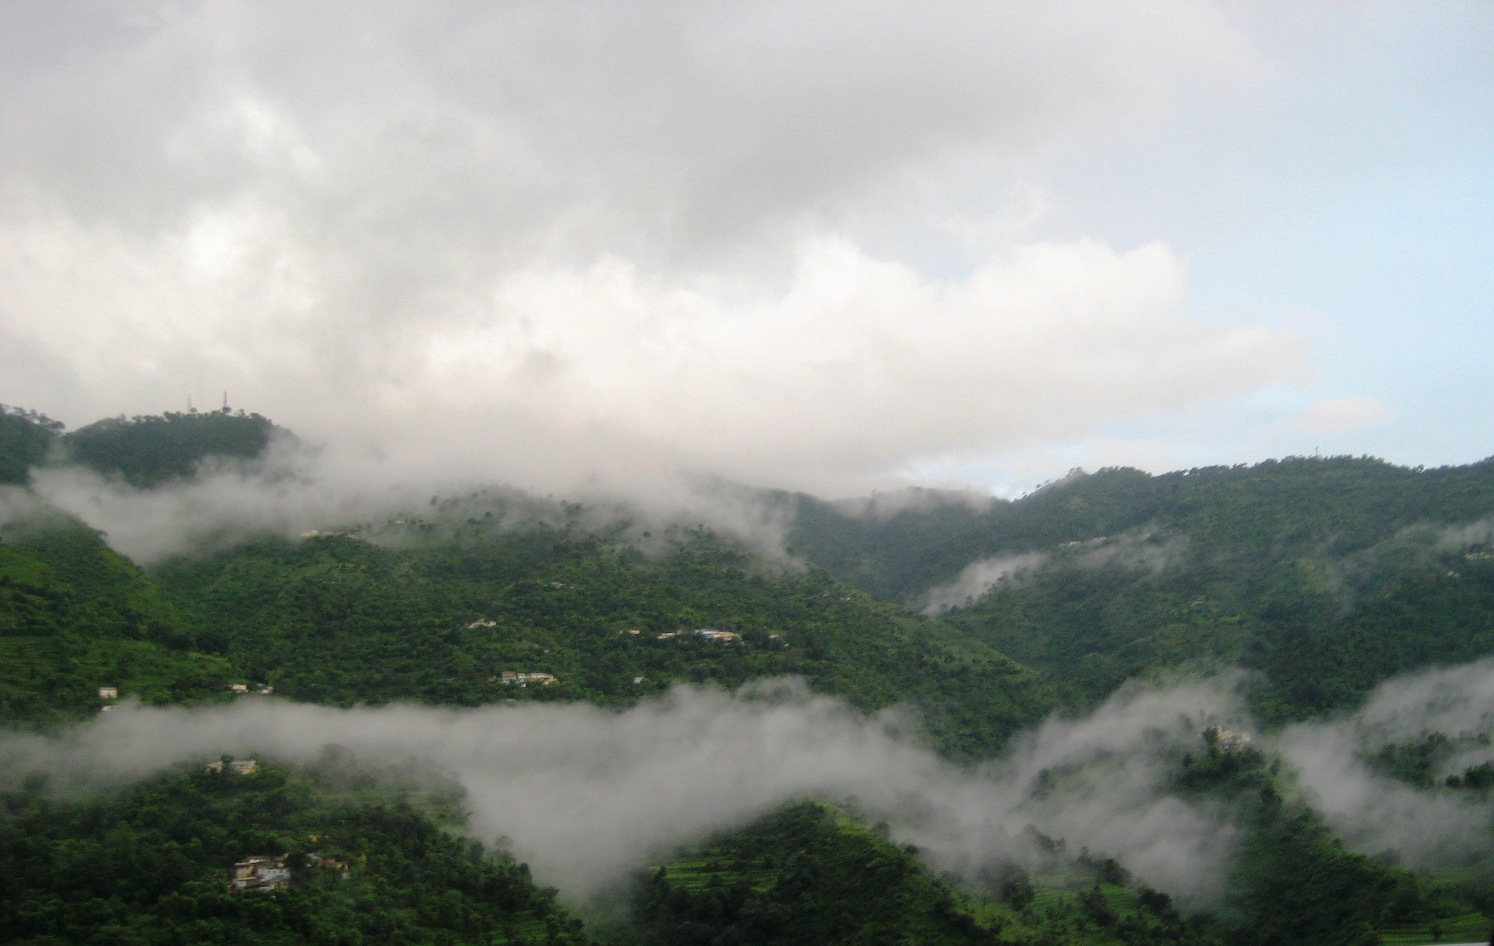 places to visit in kasauli